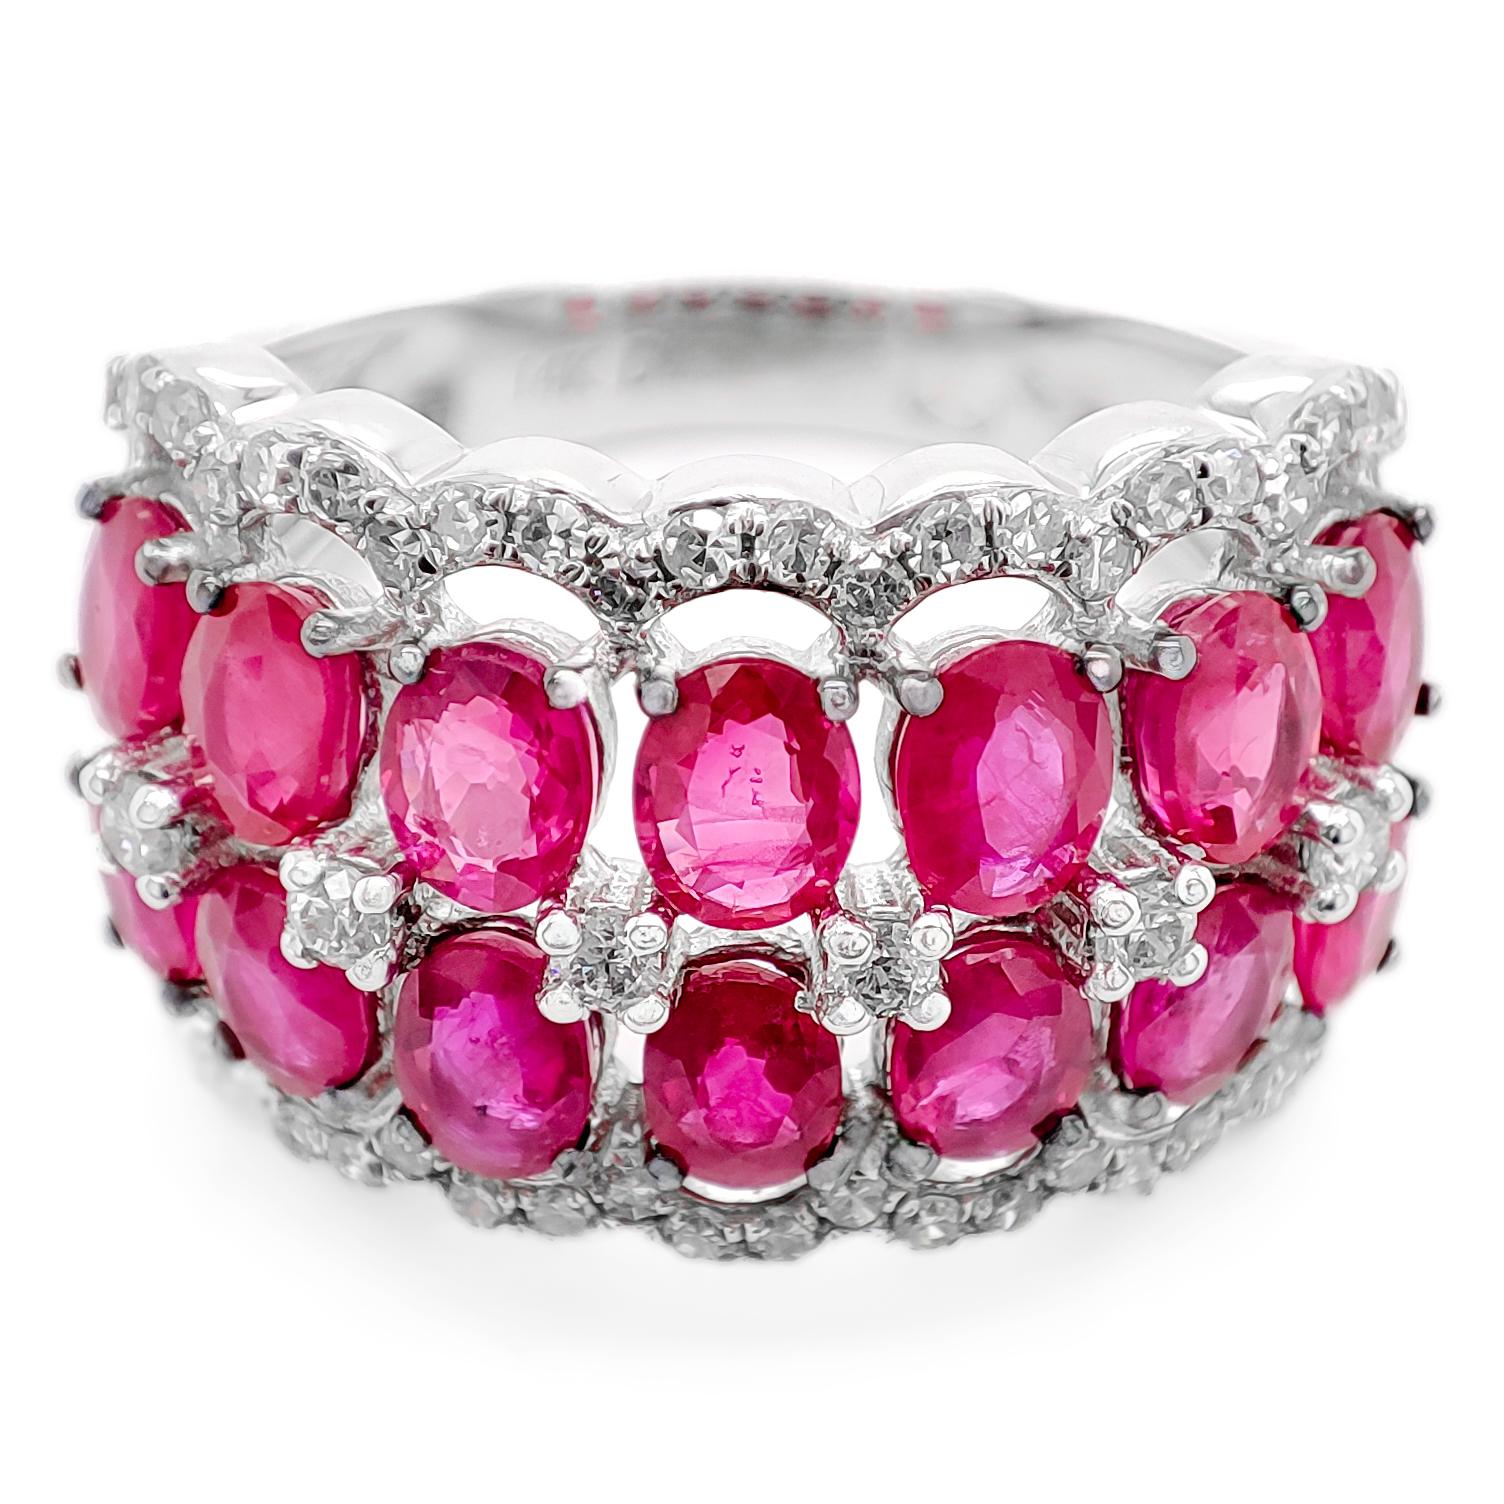 FOR US CUSTOMER NO VAT!

You've described a magnificent 4.11 carat total weight (CTW) red ruby and diamond ring, crafted in 14K white gold. The centerpiece of this exquisite ring is a cluster of 14 oval-cut red ruby stones, with a total ruby weight